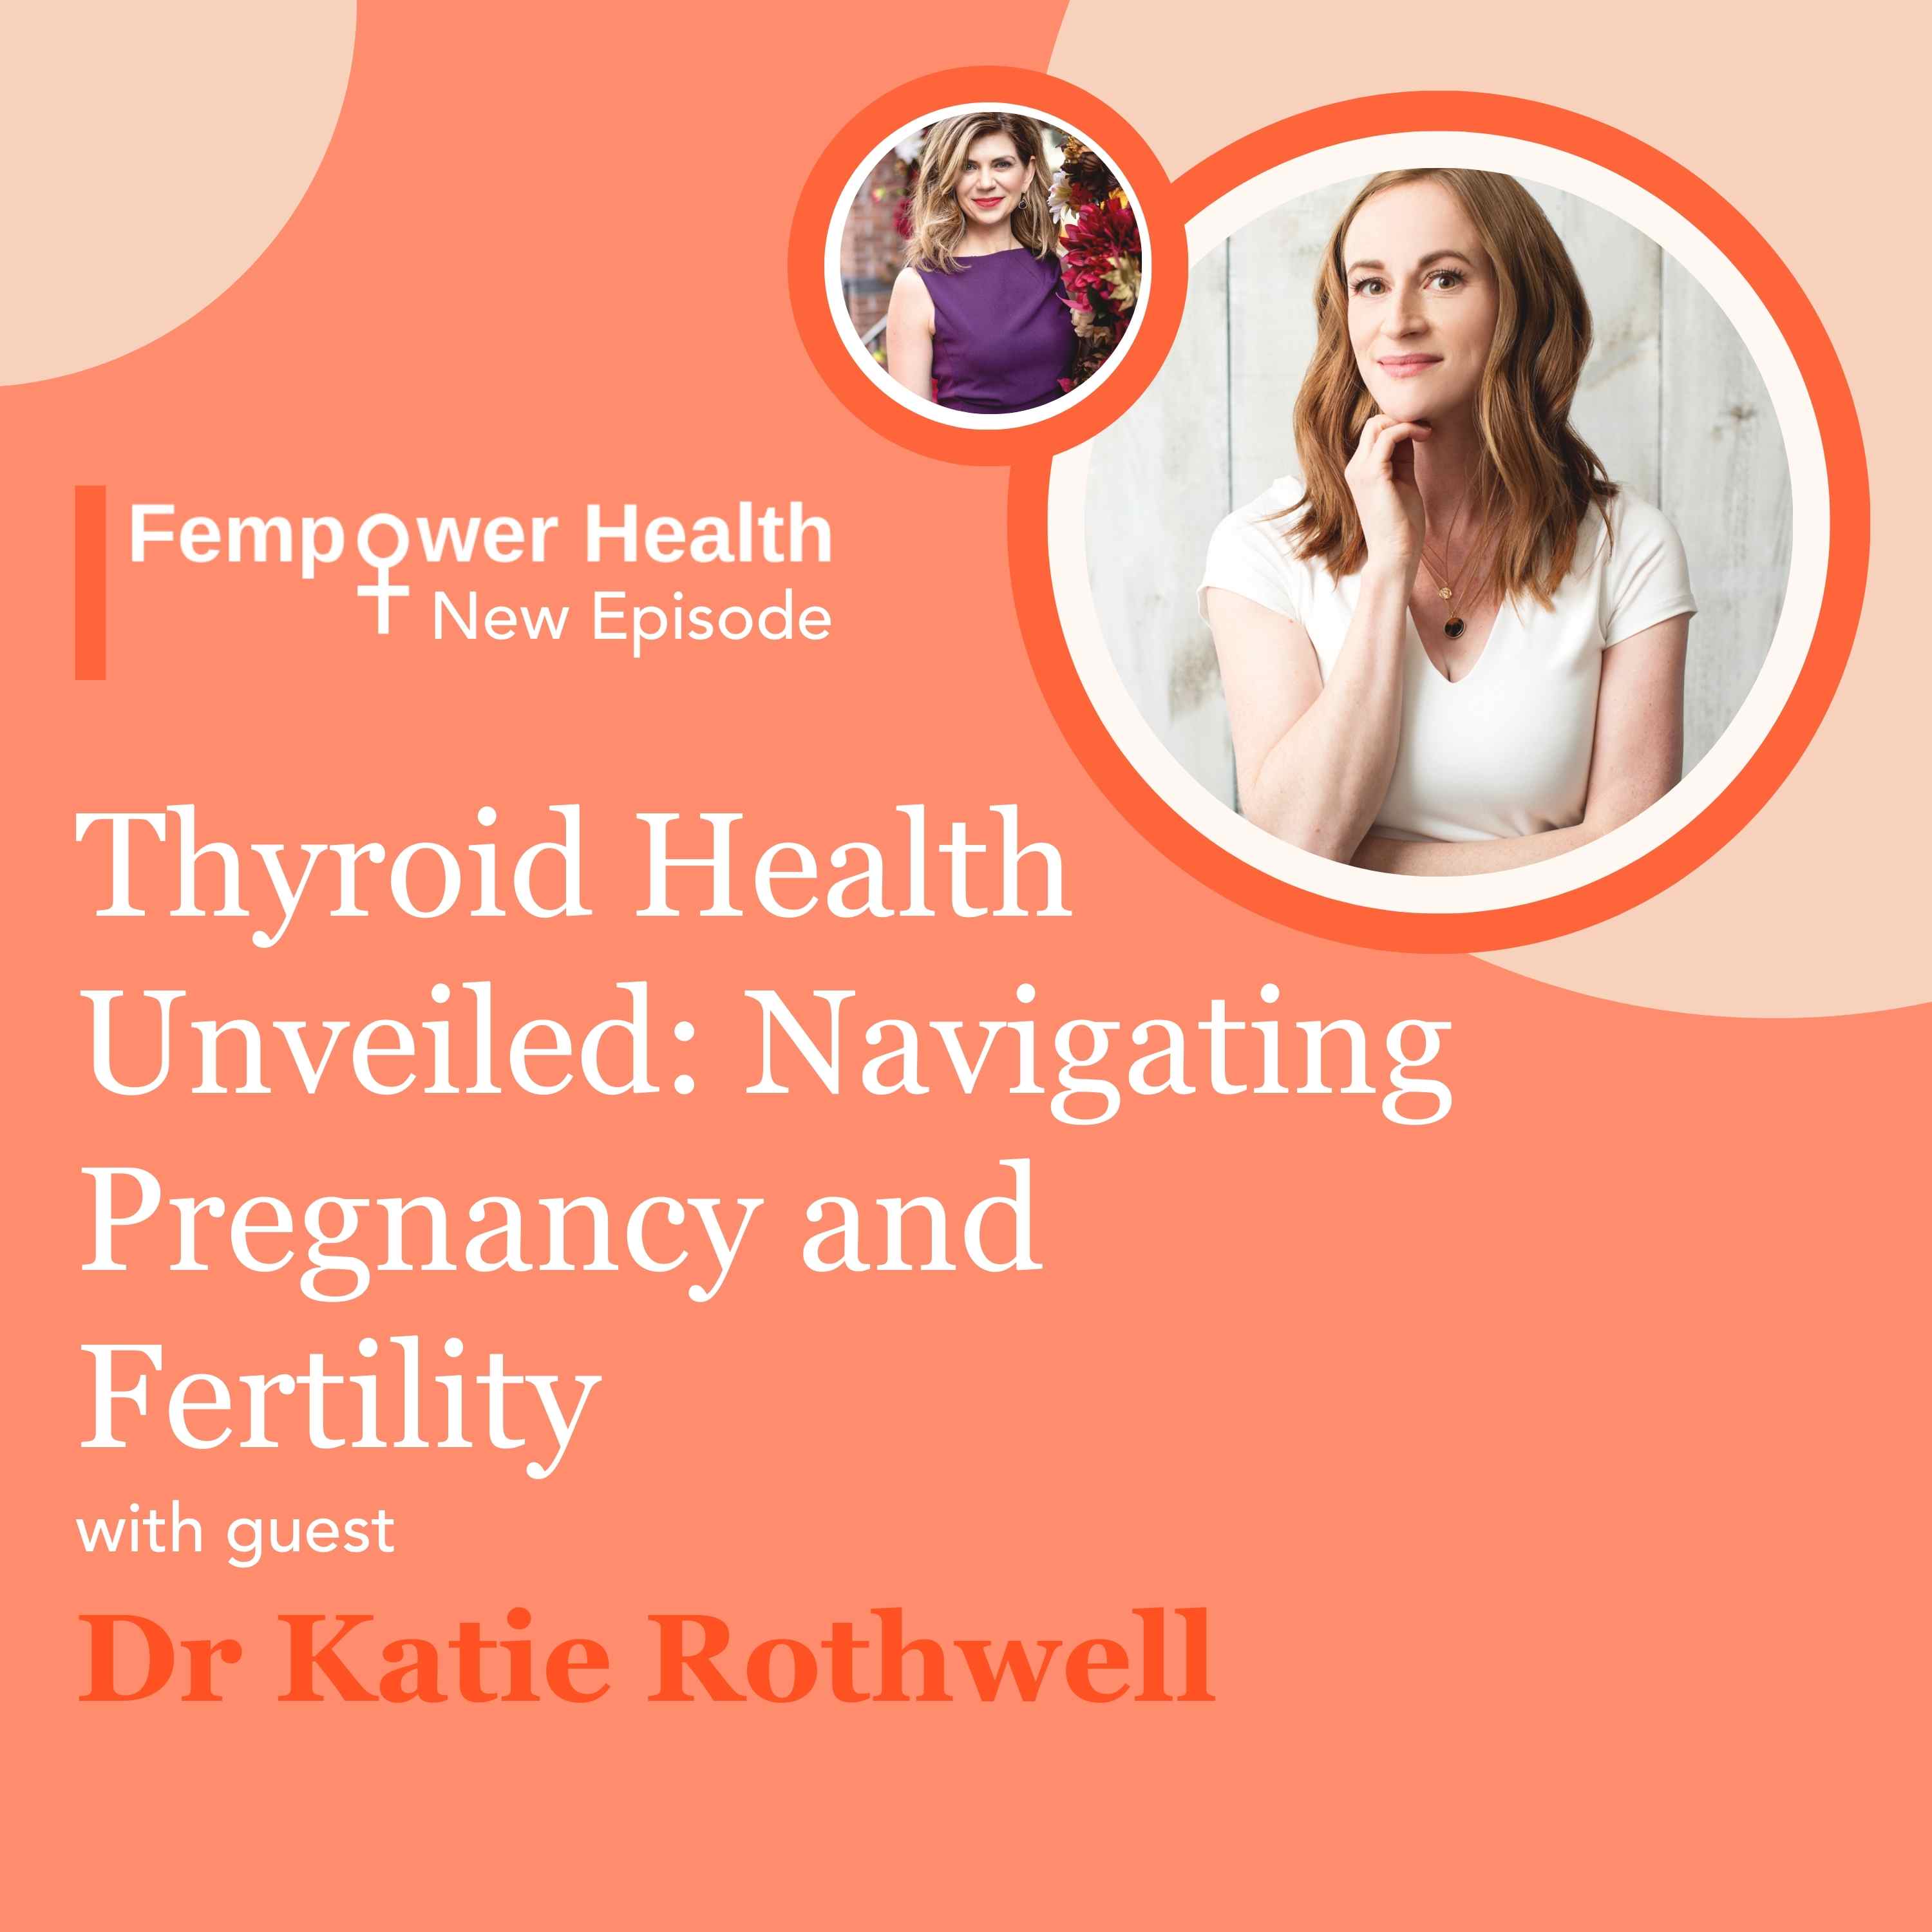 LISTEN AGAIN: Thyroid Health Unveiled: Navigating Pregnancy and Fertility | Dr. Katie Rothwell